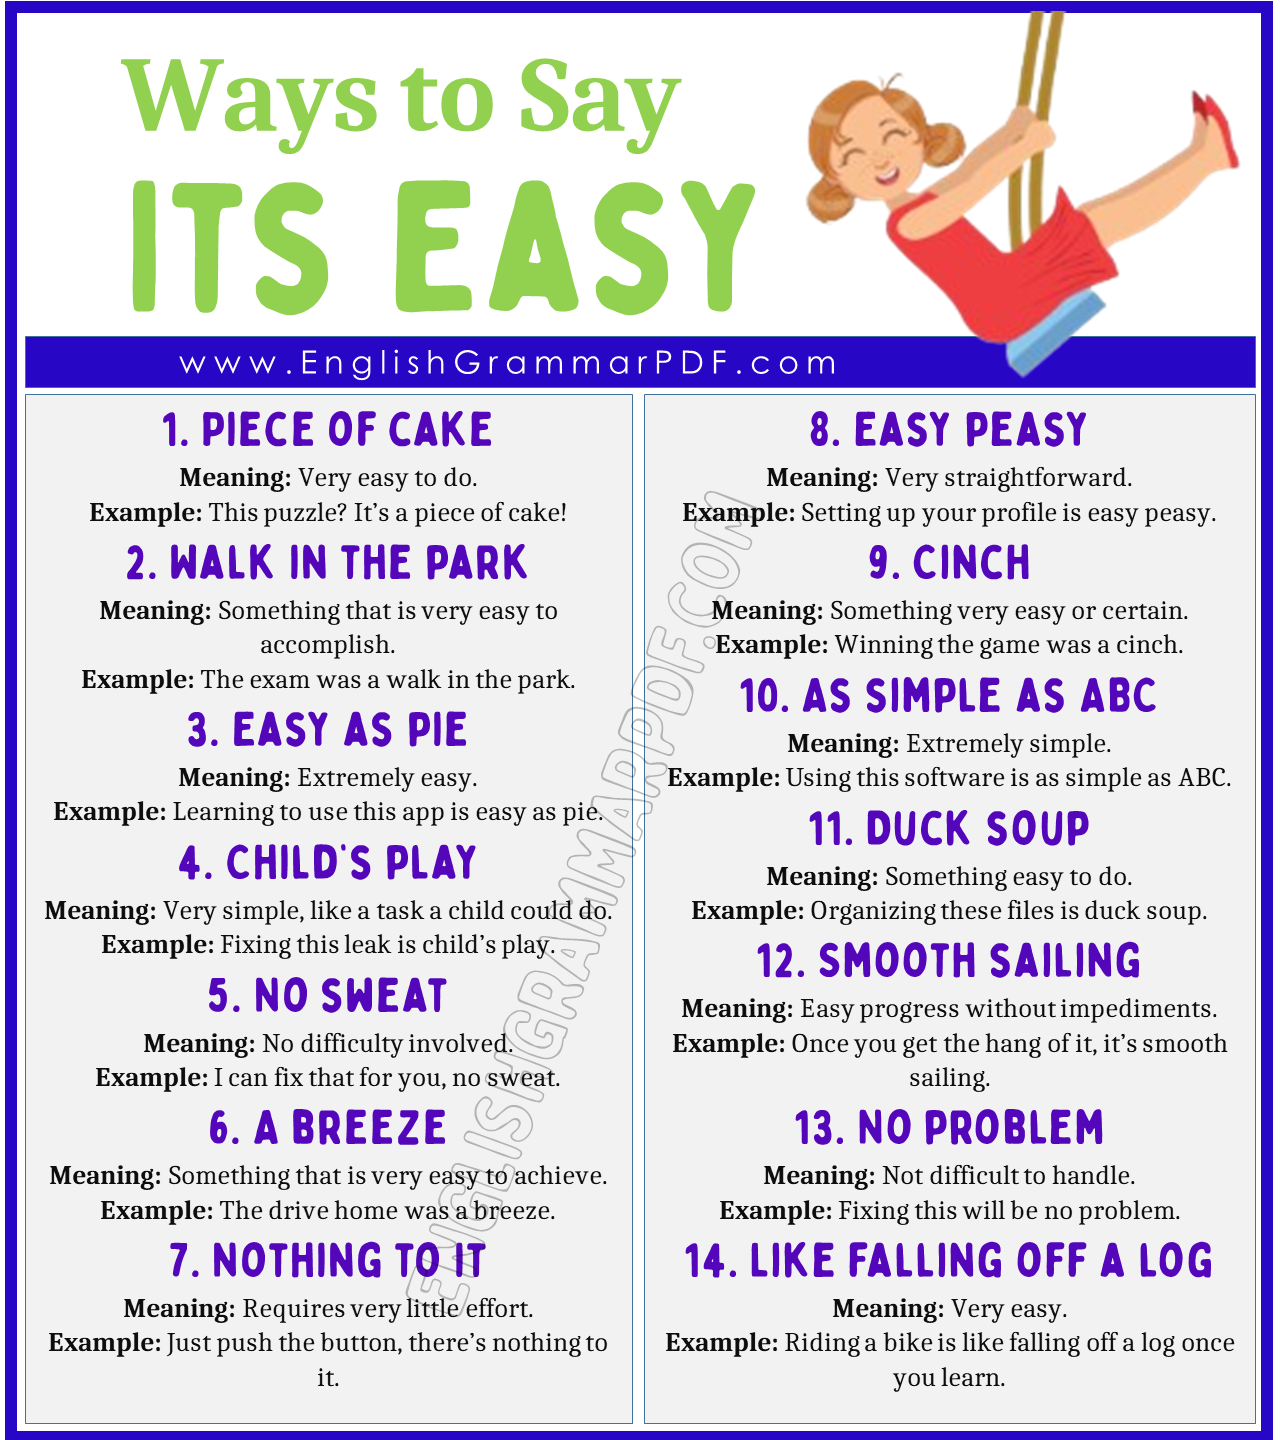 Ways to Say It's Easy